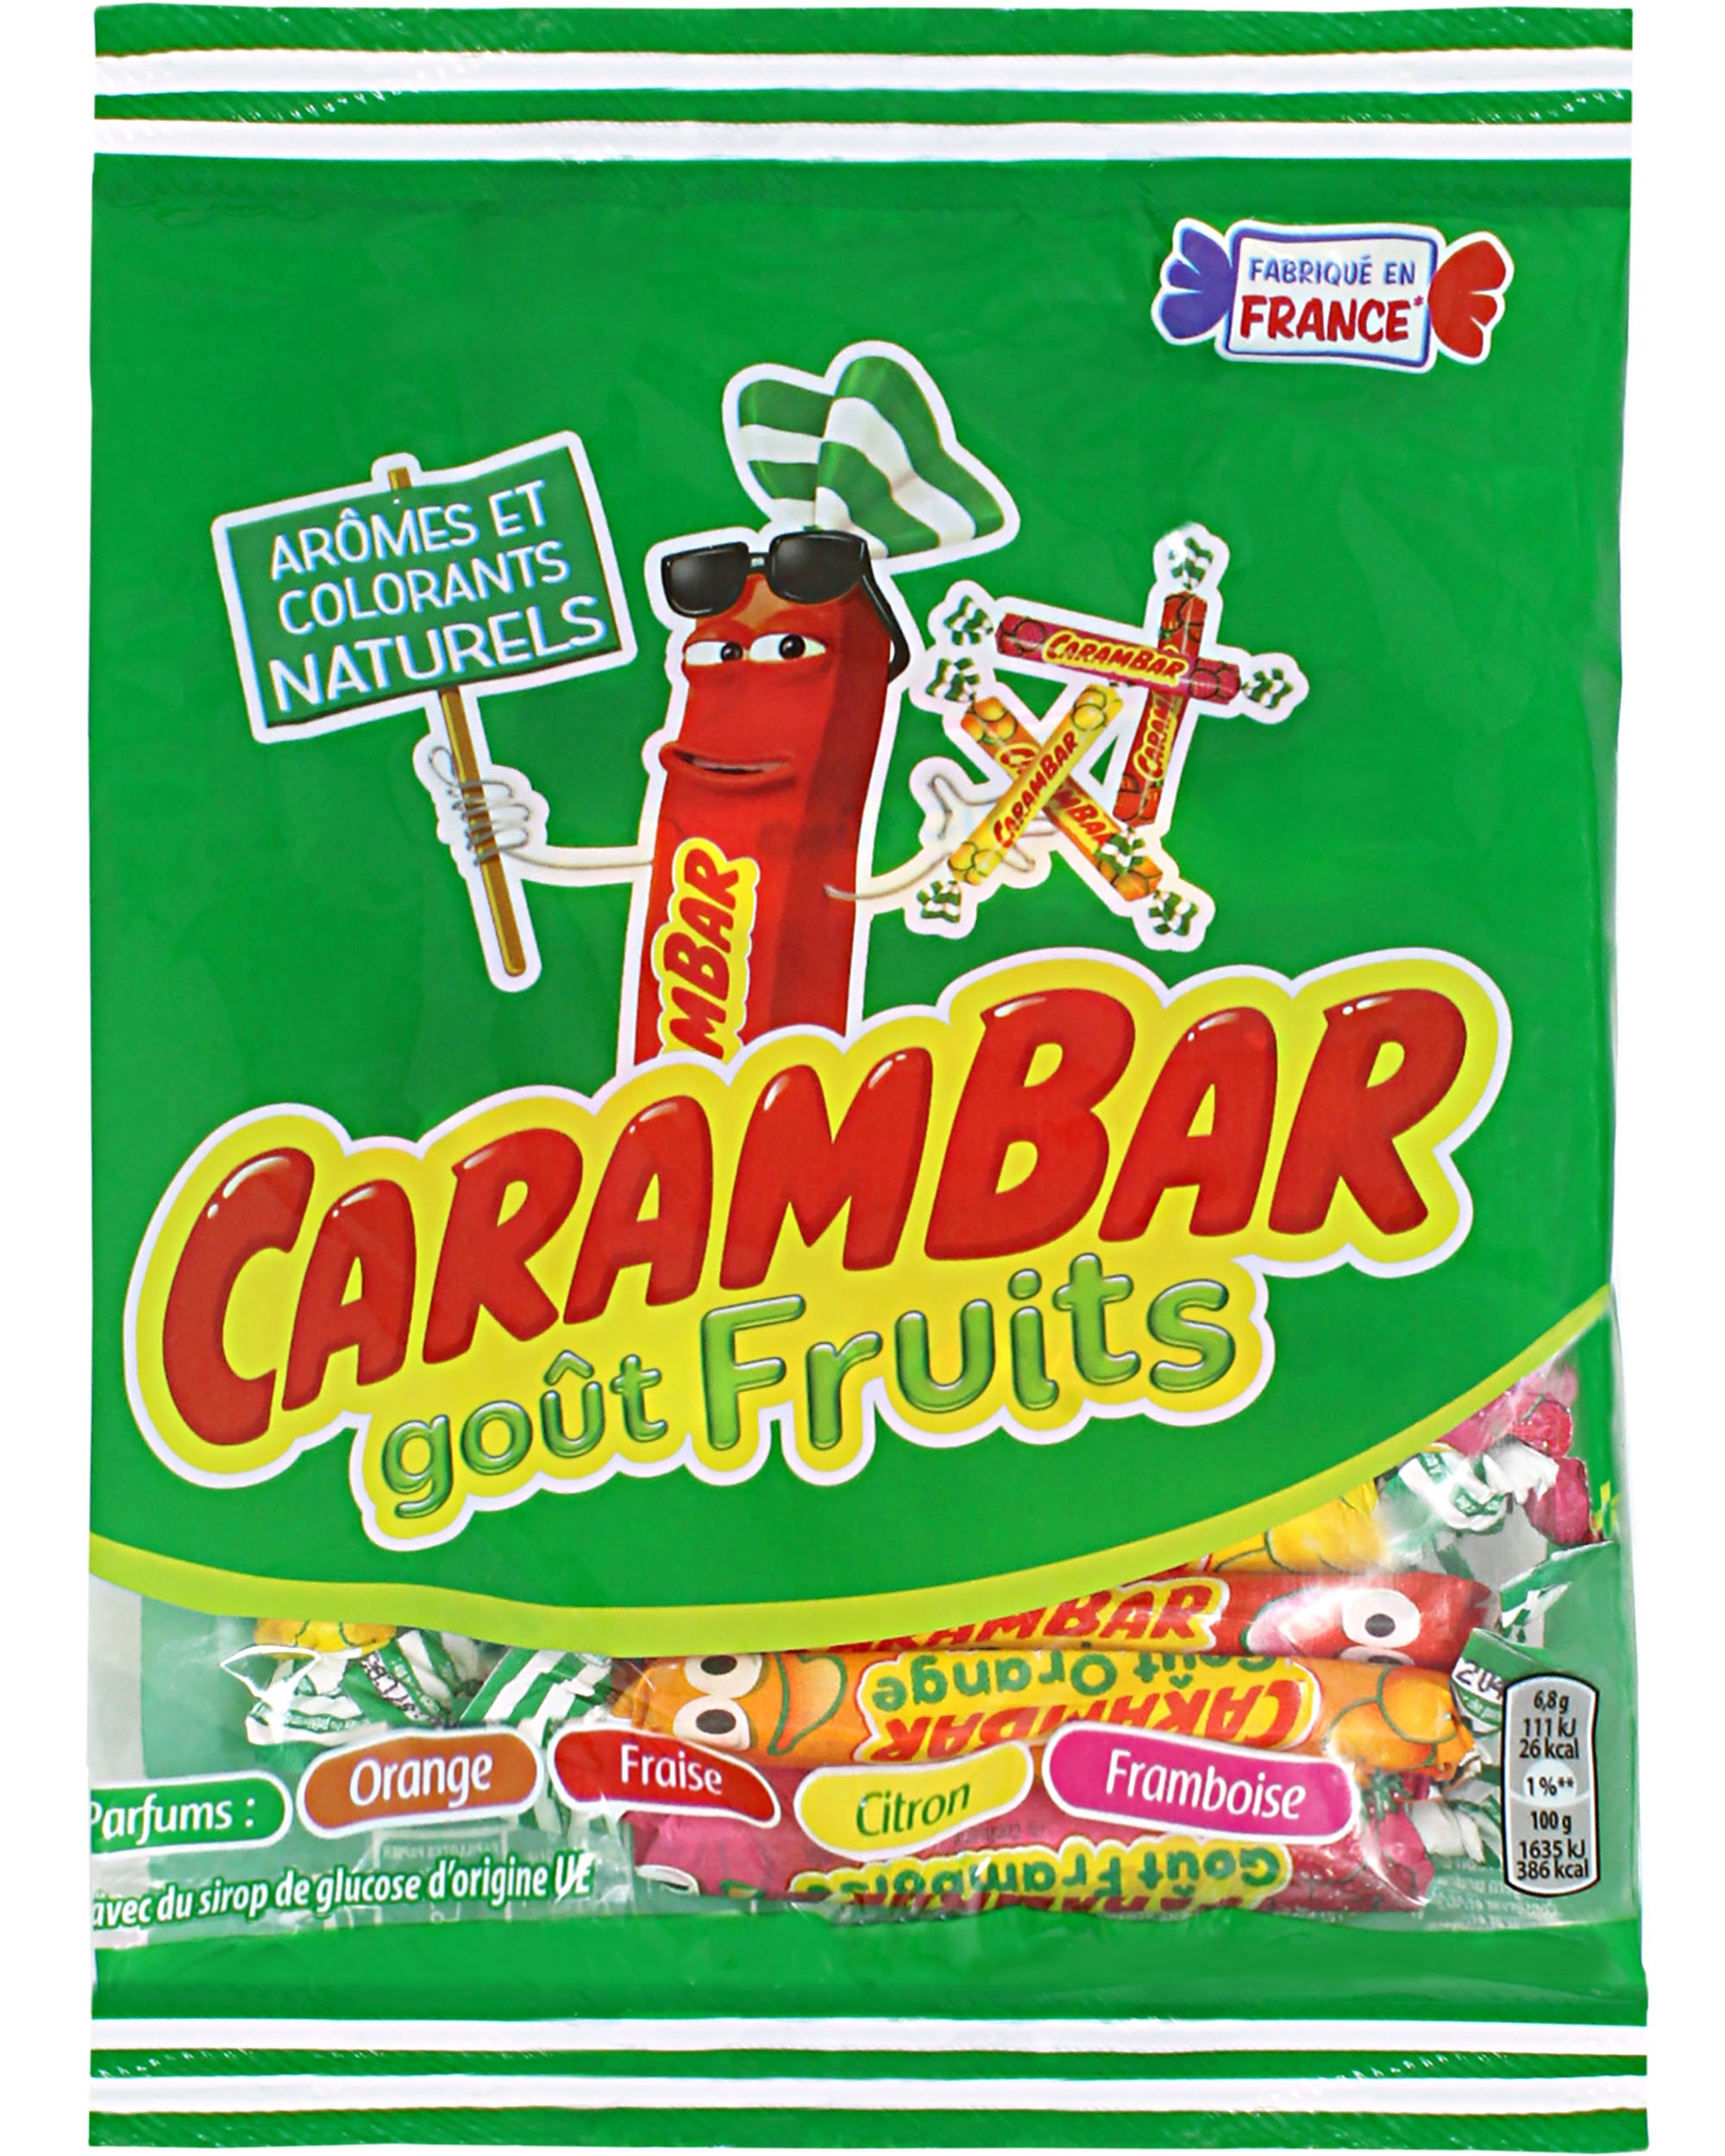 Carambar Caramel Candy from La Pie Qui Chante - From France